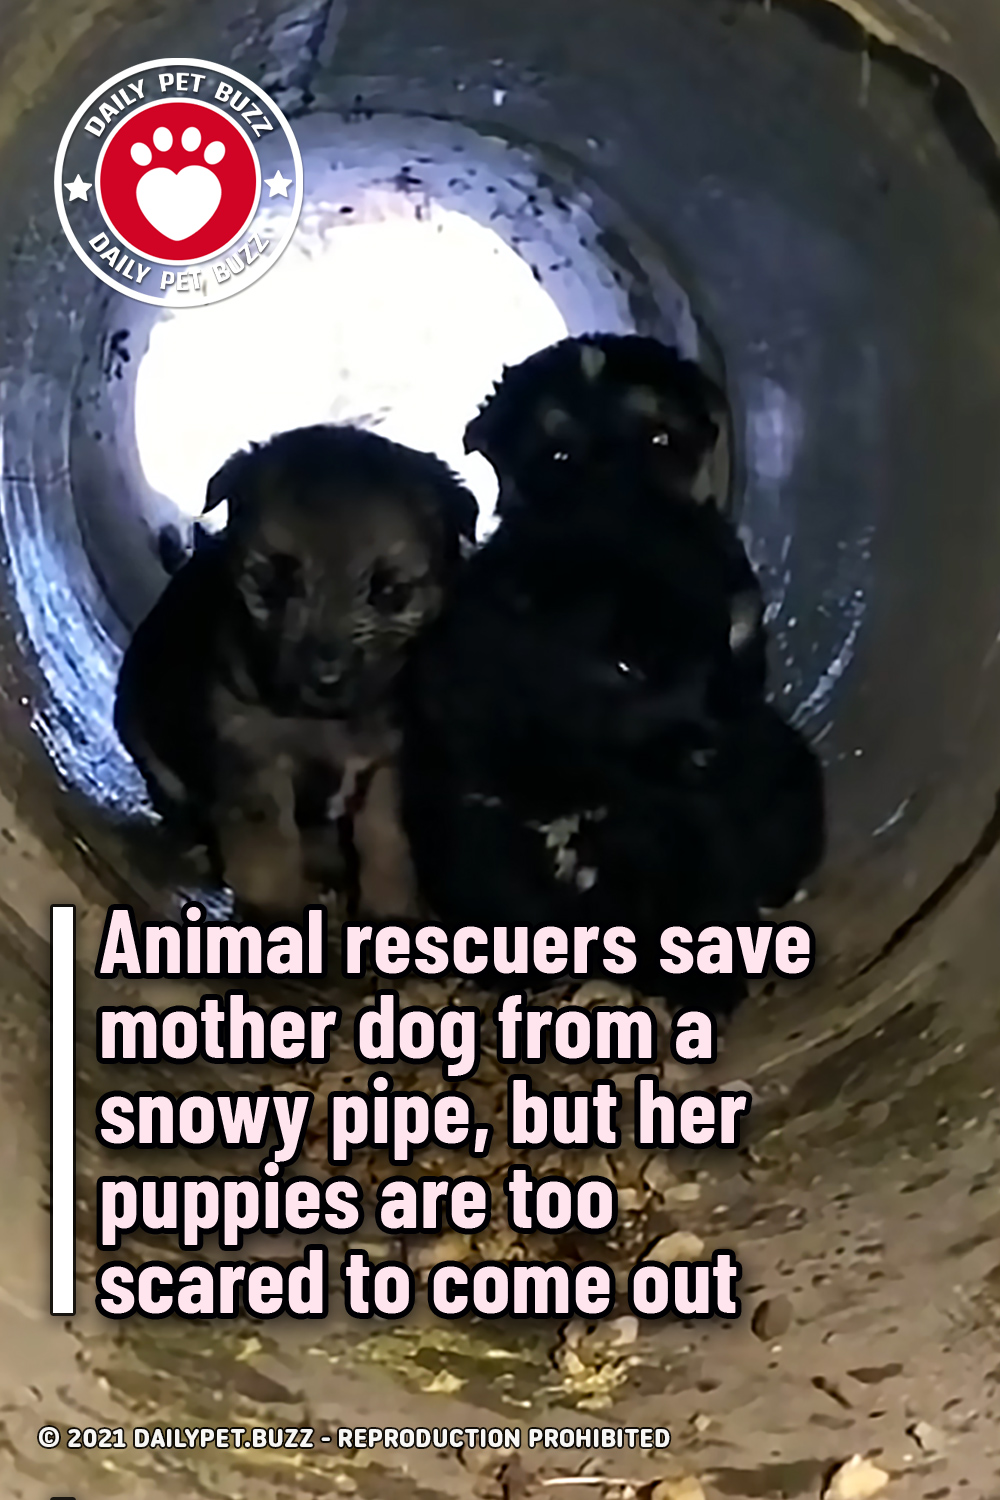 Animal rescuers save mother dog from a snowy pipe, but her puppies are too scared to come out